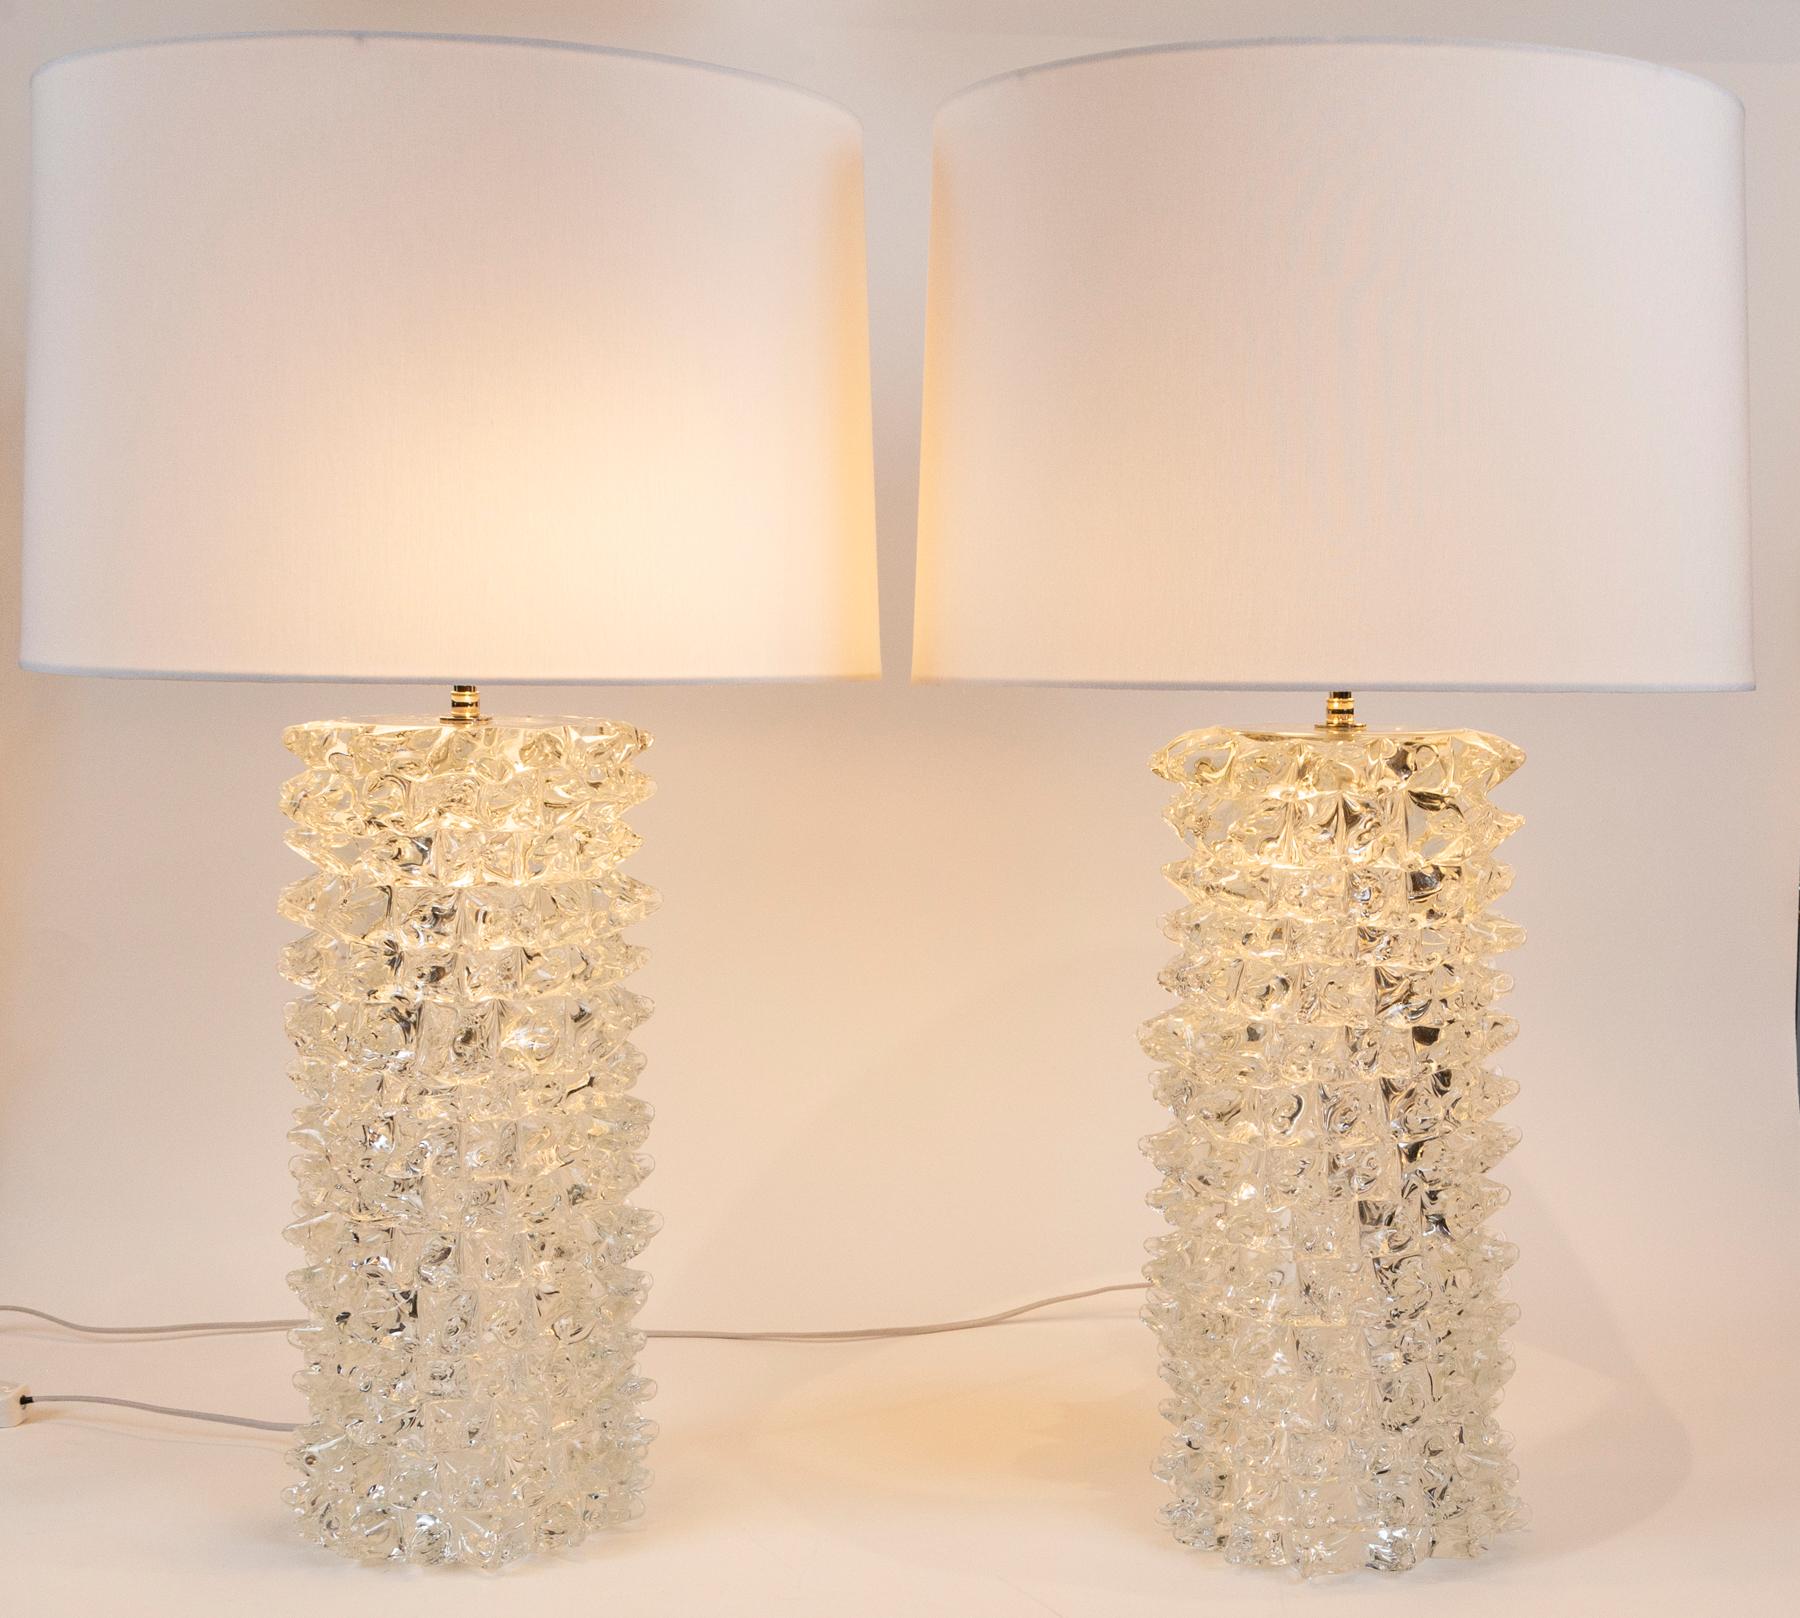 Monumental Pair of Murano Blown Rostrato Lamps, Contemporary 1